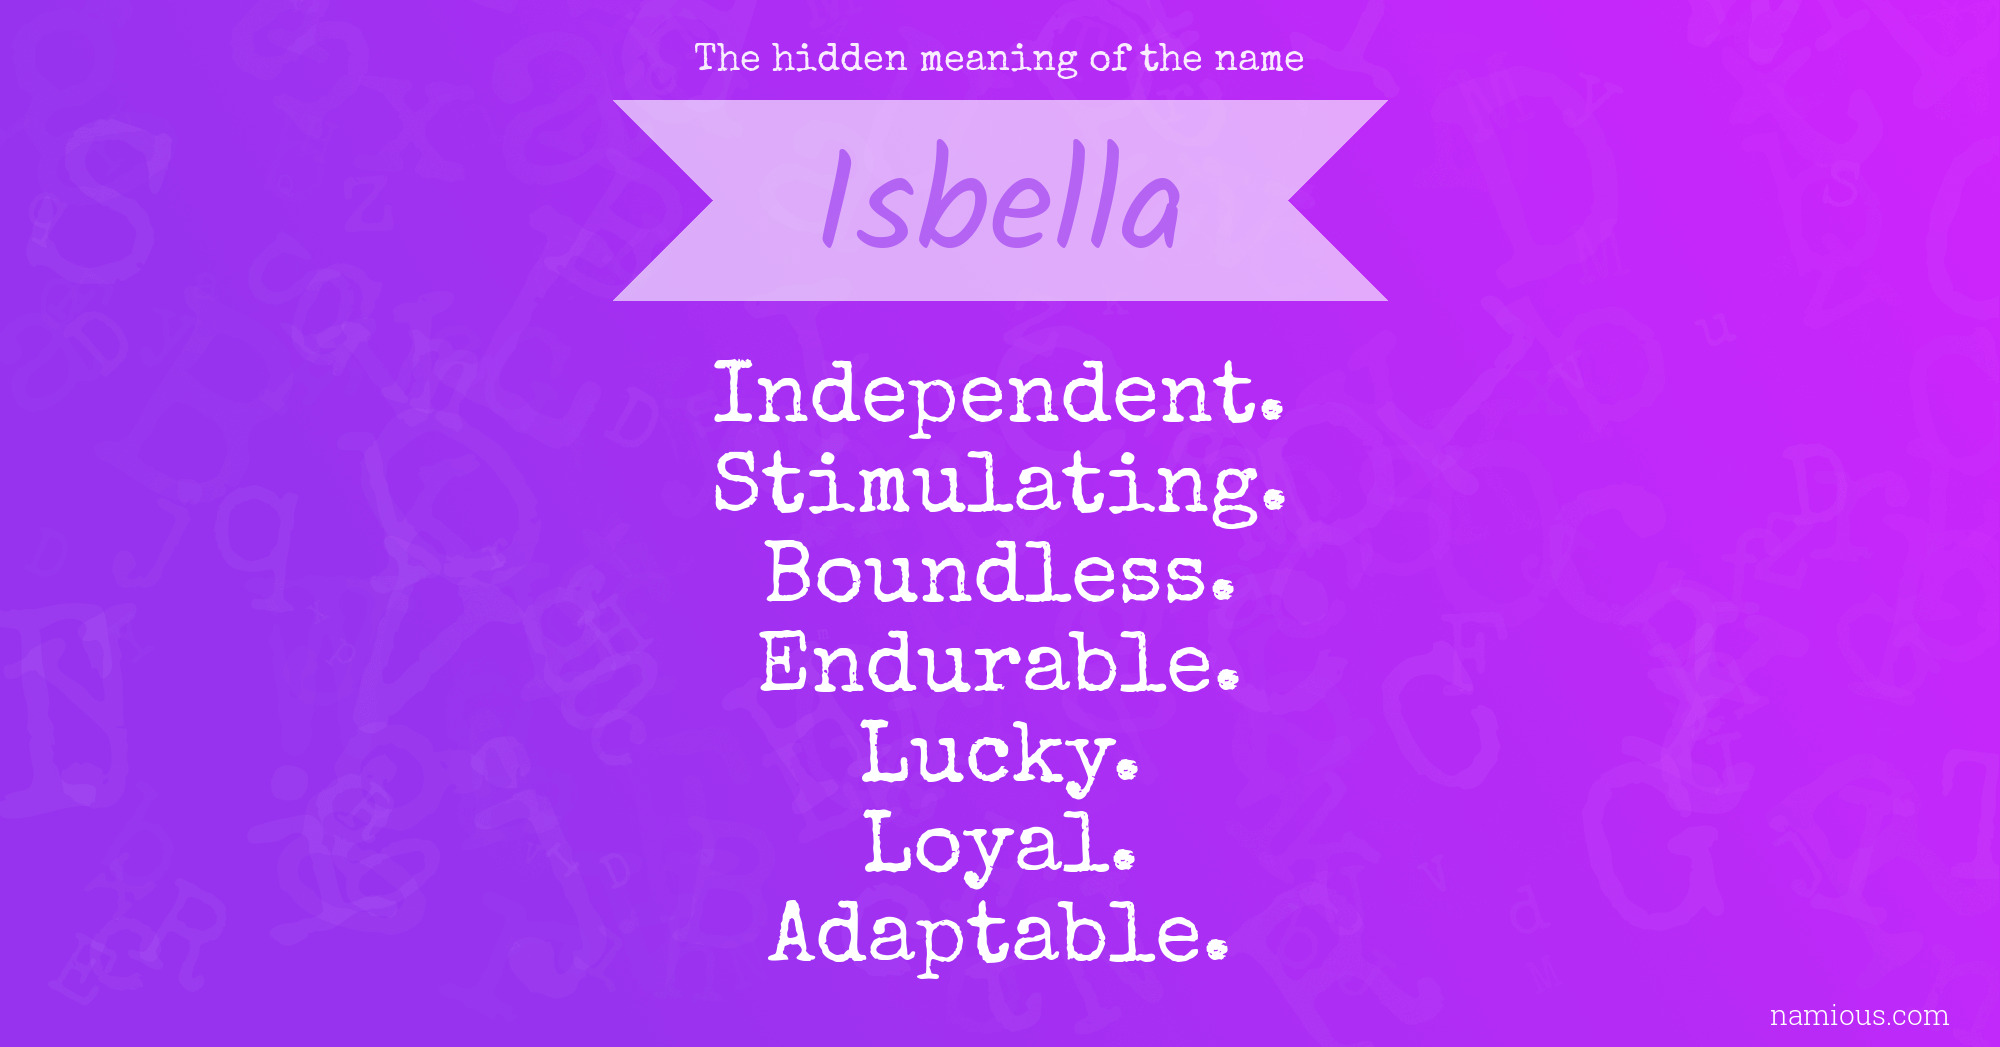 The hidden meaning of the name Isbella